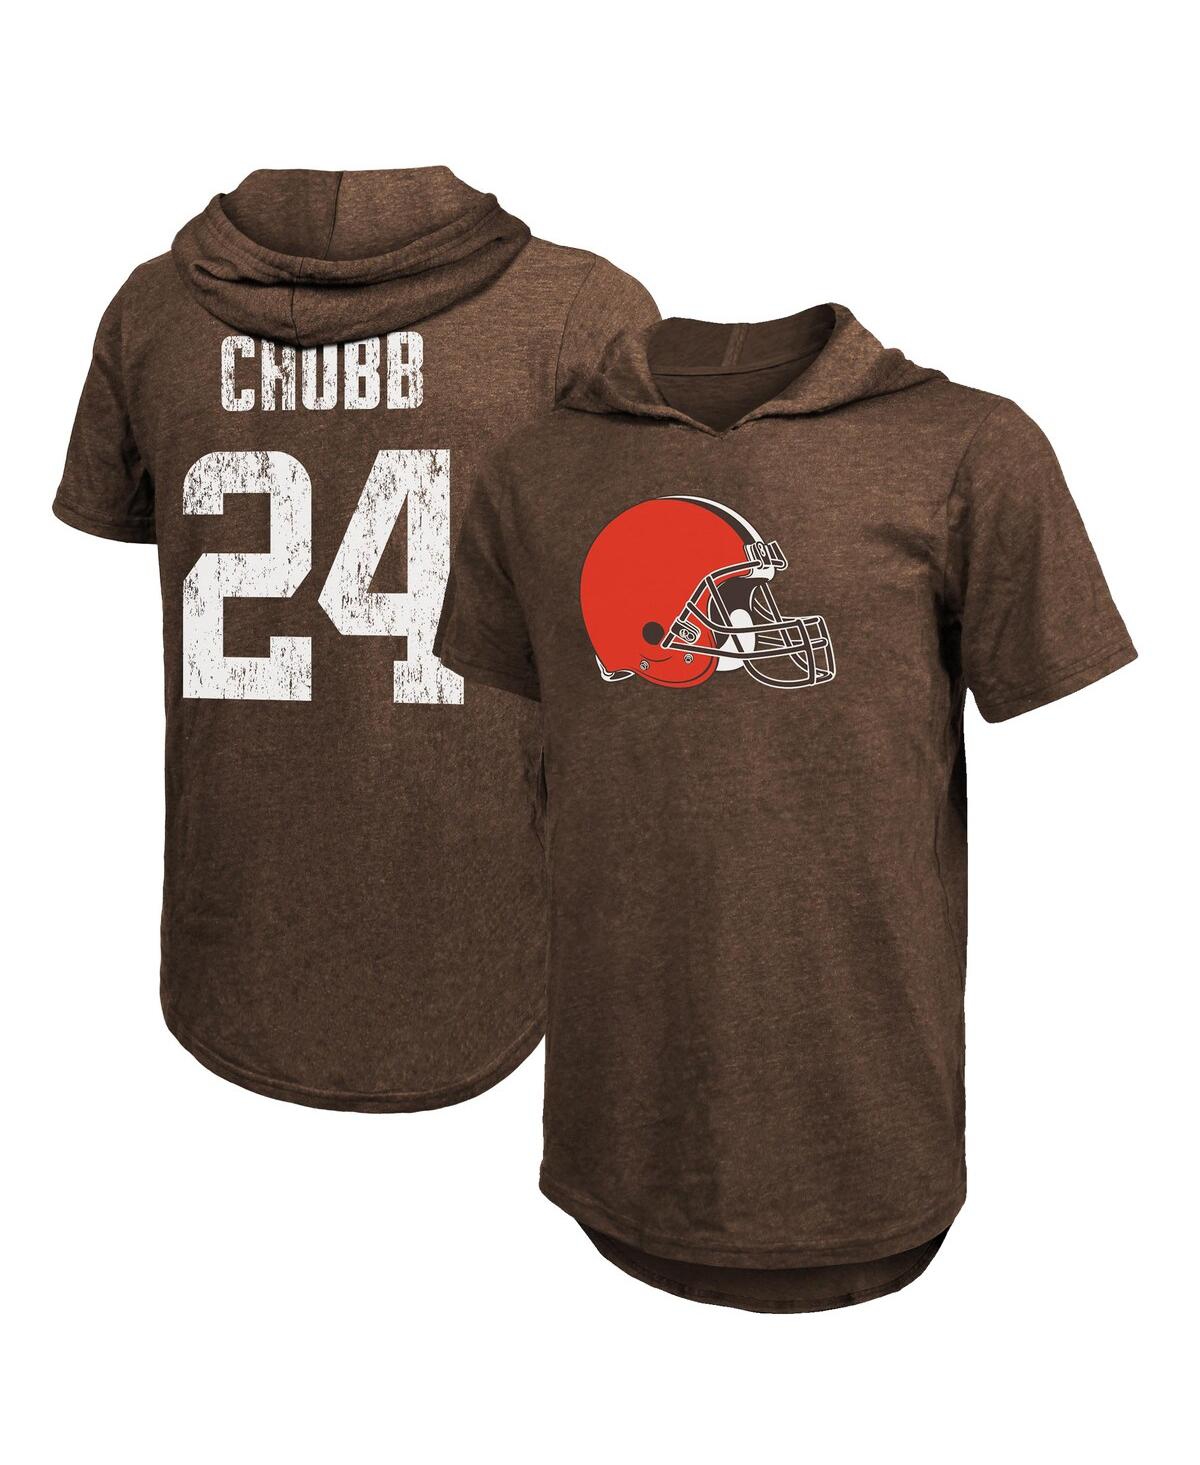 Men's Majestic Threads Nick Chubb Brown Cleveland Browns Player Name and Number Tri-Blend Hoodie T-shirt - Brown